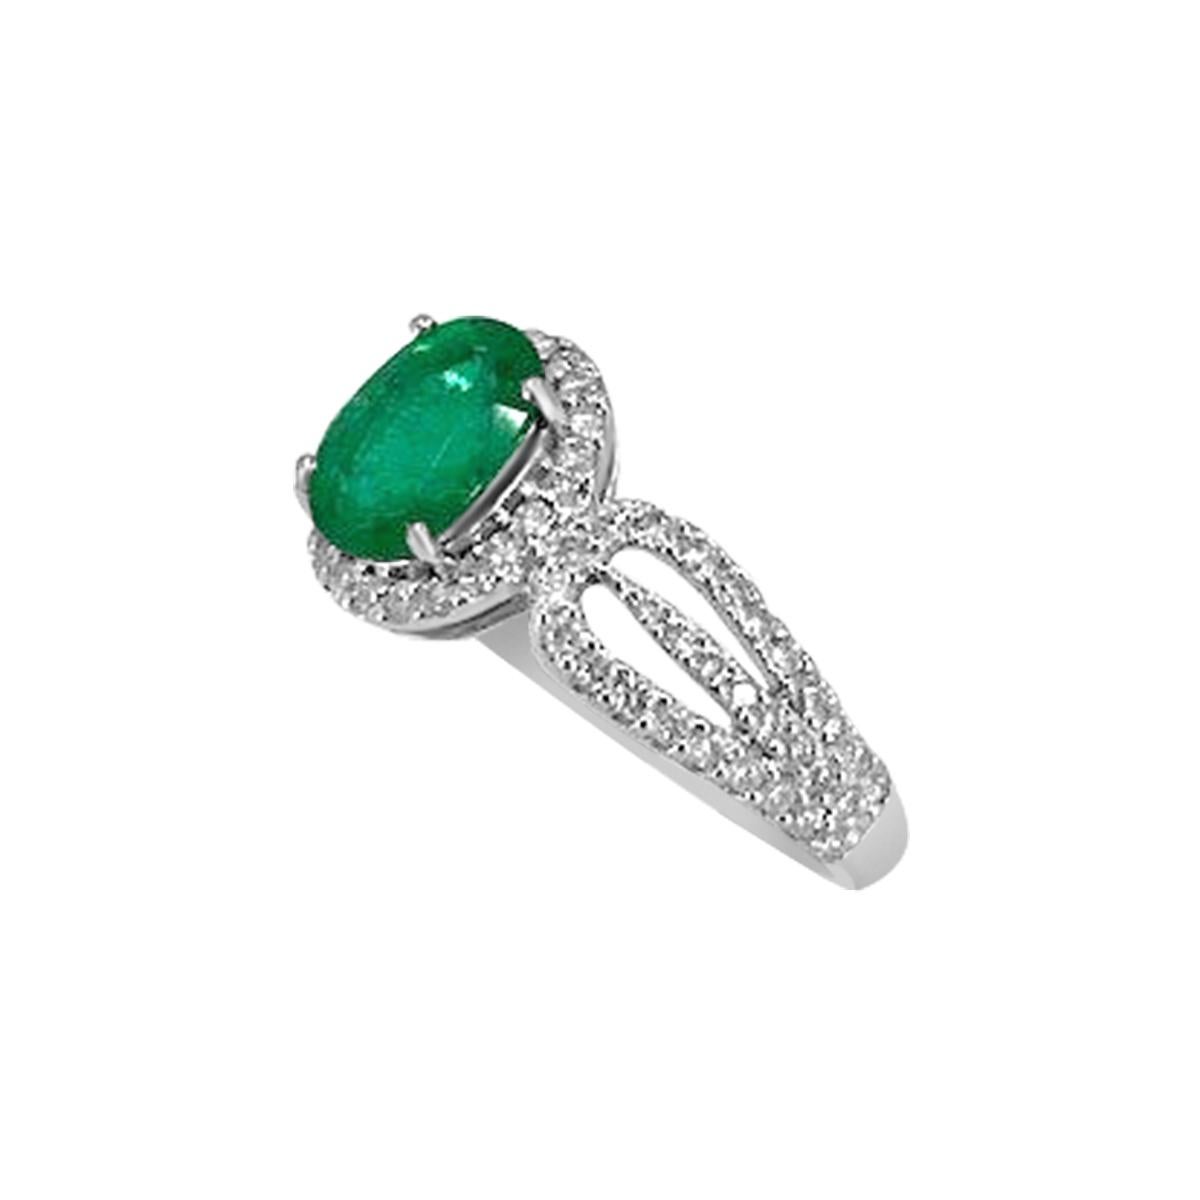 This Beautiful Emerald And Diamond Ring, Featuring Oval Shaped Full Cuts , Clean Clarity, Vivid Green In 8x6mm With Diamonds. Perfectly Settled In 18K White Gold That Hug The Finger Perfectly.


Style# TS1023R
Emerald : Oval 8x6mm 1.12cts
Diamonds: